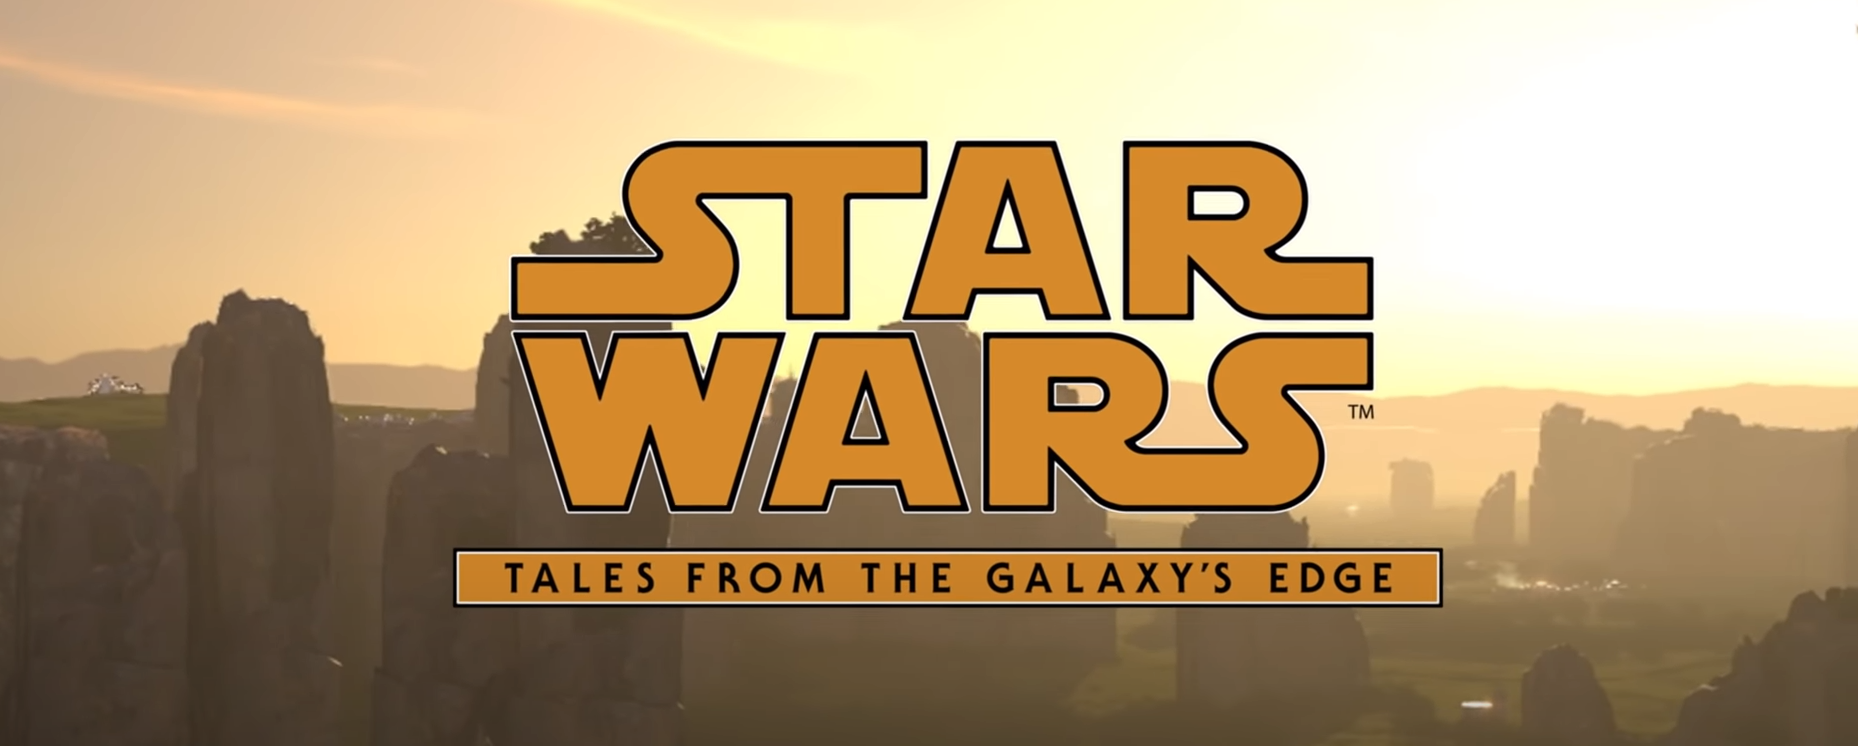 Star Wars: Tales from the Galaxy's Edge - ANÁLISIS PARTE I & LAST CALL